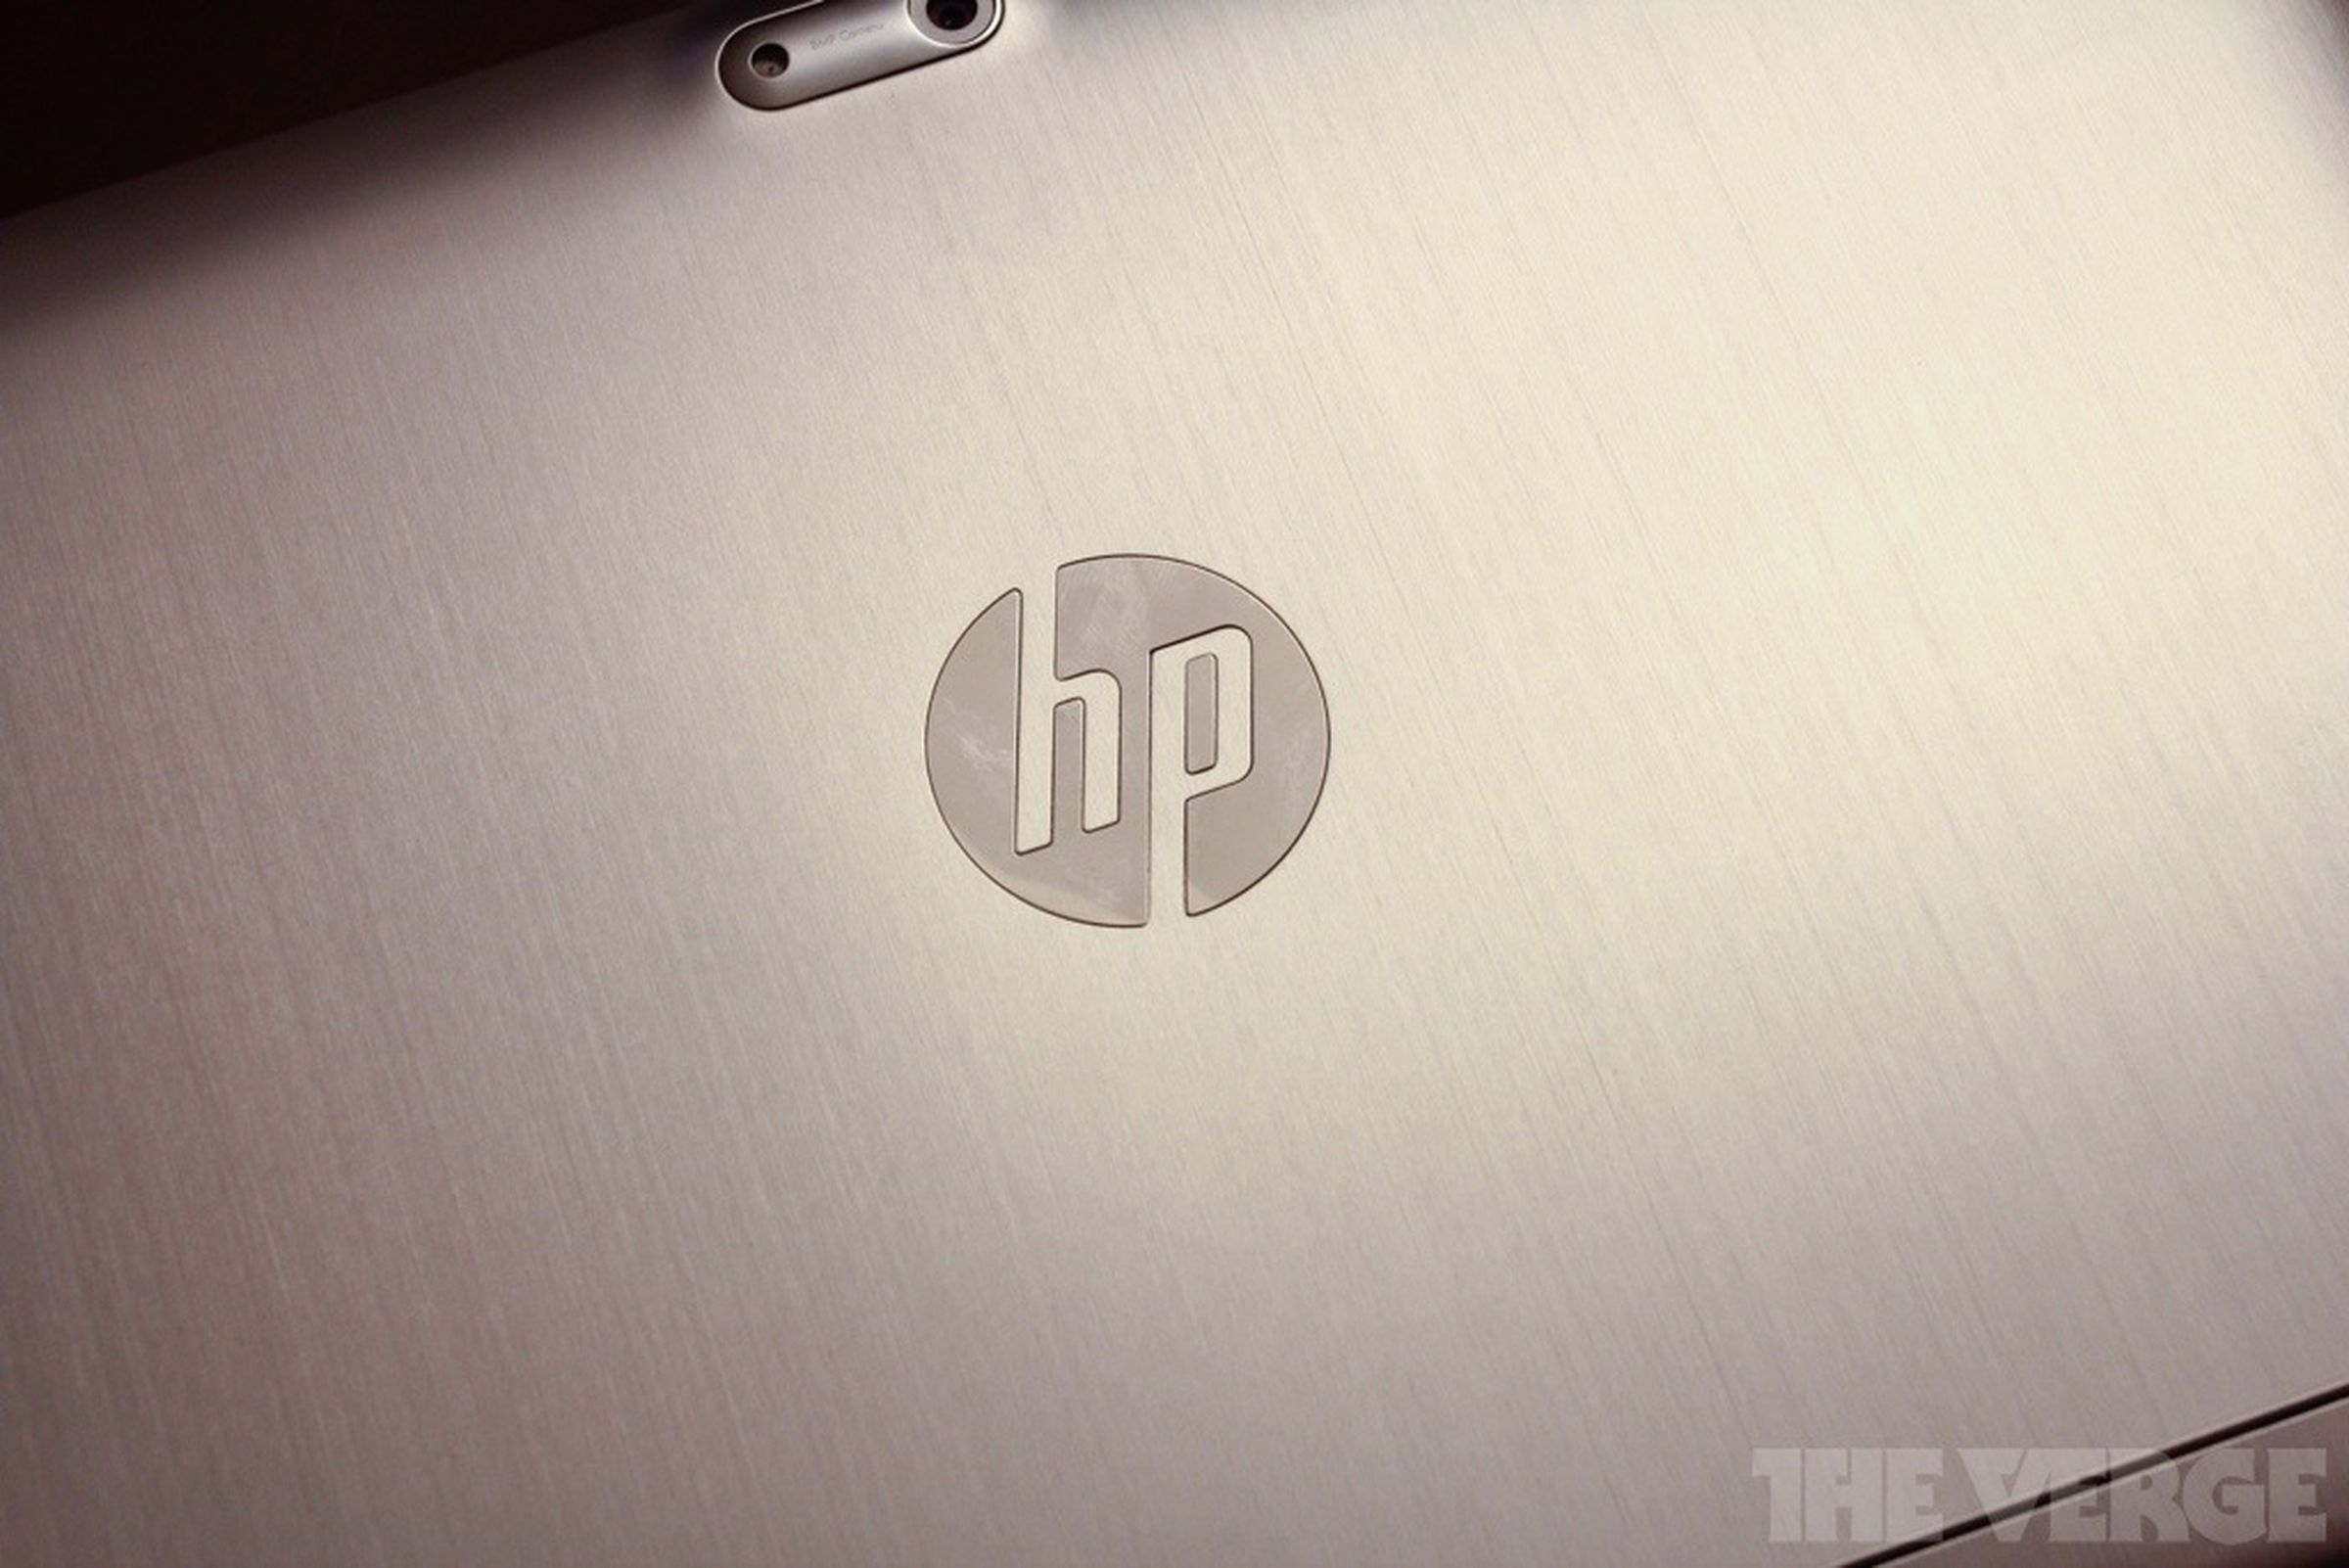 HP Envy x2 hands-on photos